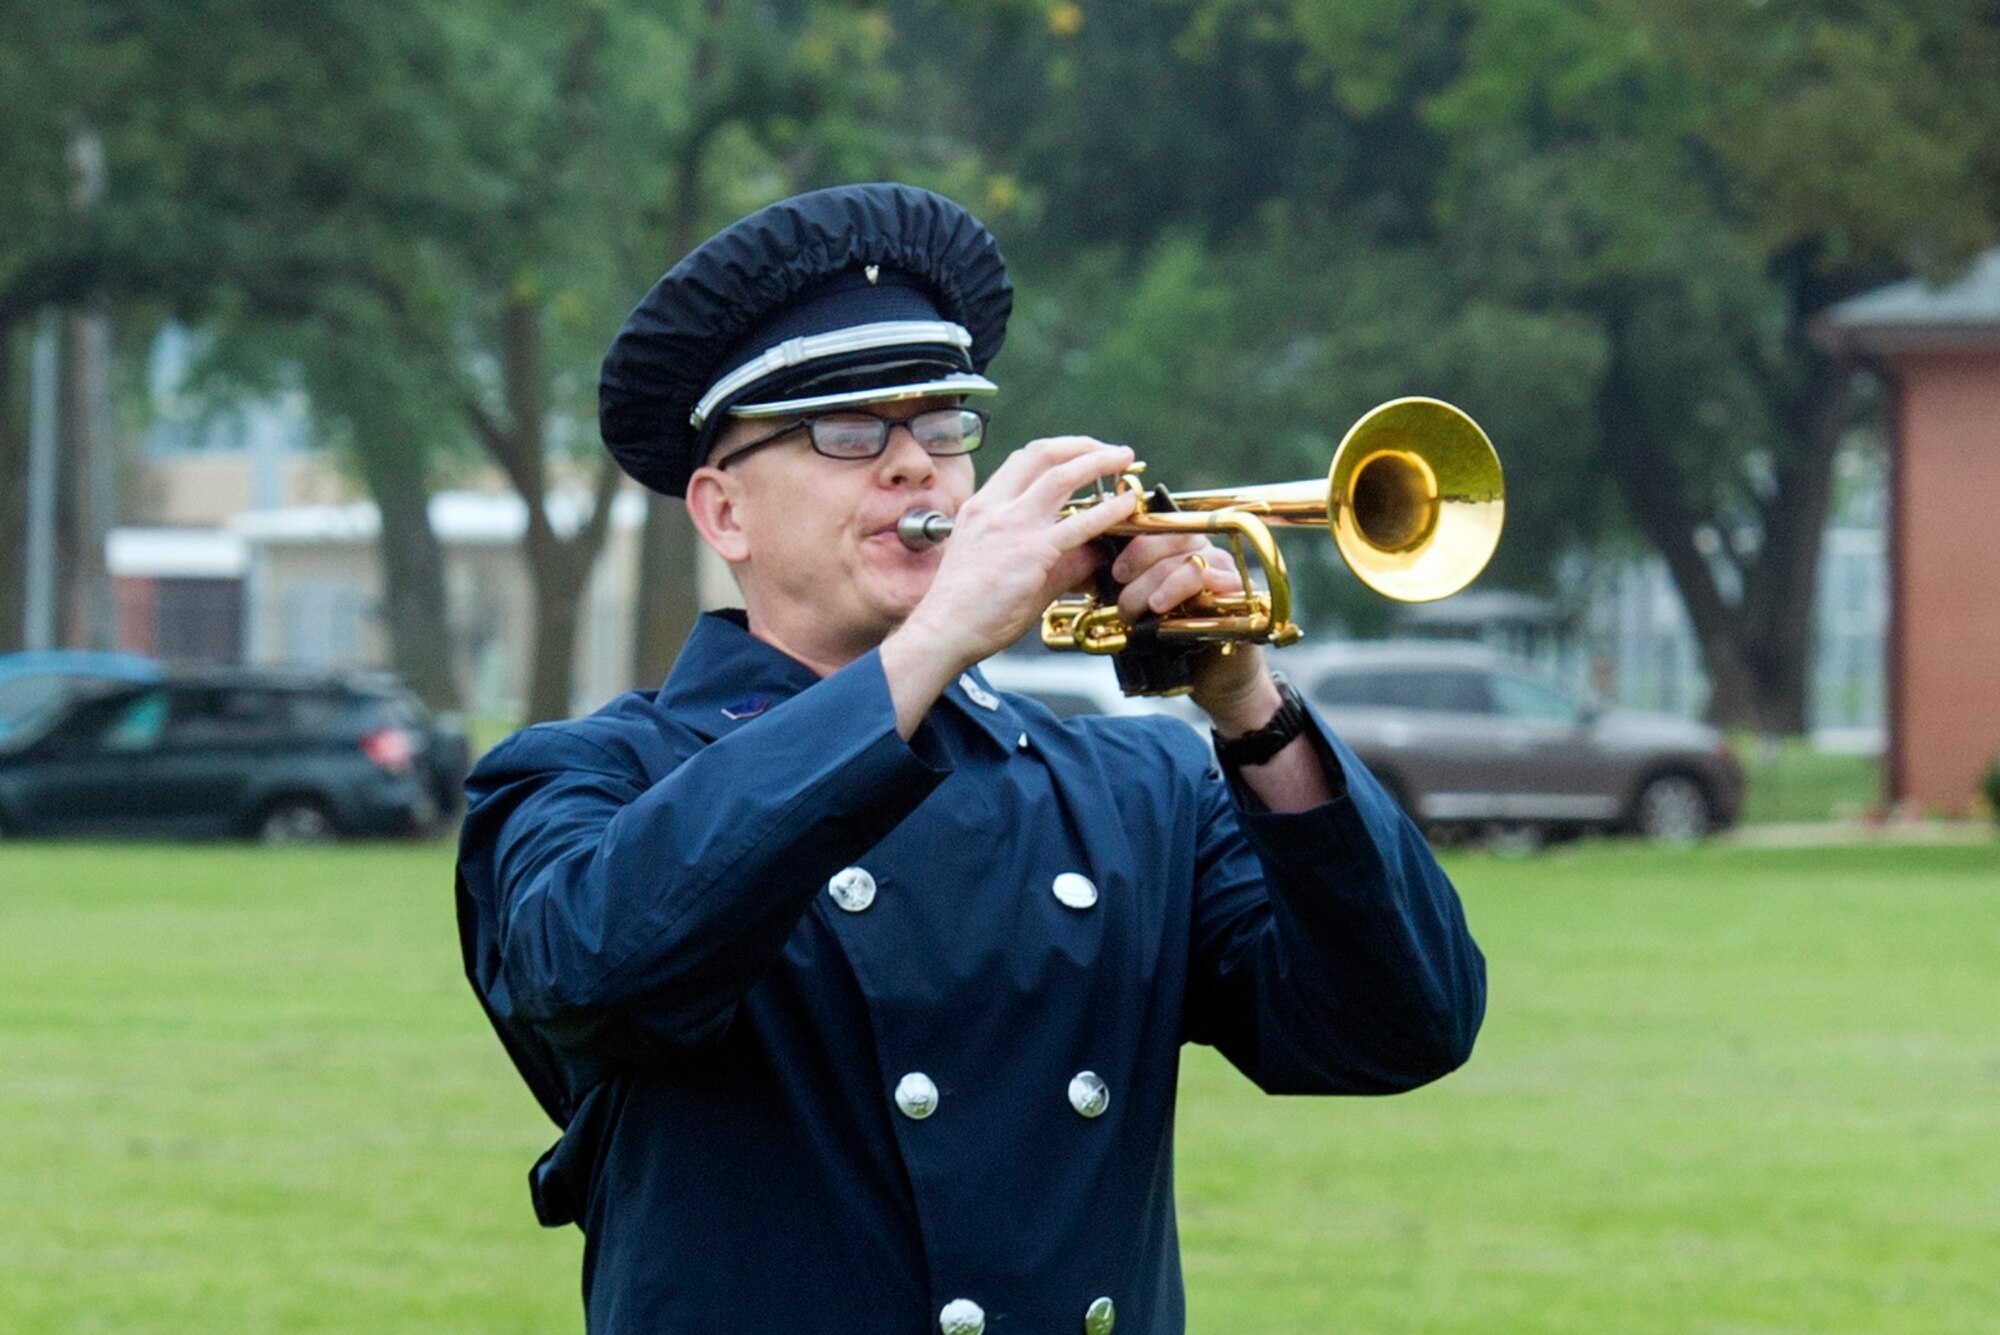 U.S. Air Force Staff Sgt. Daniel Thrower, Heartland of America Band hornist, plays “Taps,” during the 60528 Remembrance Ceremony Aug. 30, 2018, at Offutt Air Force Base, Nebraska. The ceremony was held to honor the 17 crewmembers who were lost during the Cold War when their C-130, which was modified to fly reconnaissance missions, was shot down. The aircraft’s tail number was 60528. (U.S. Air Force Photo by L. Cunningham)